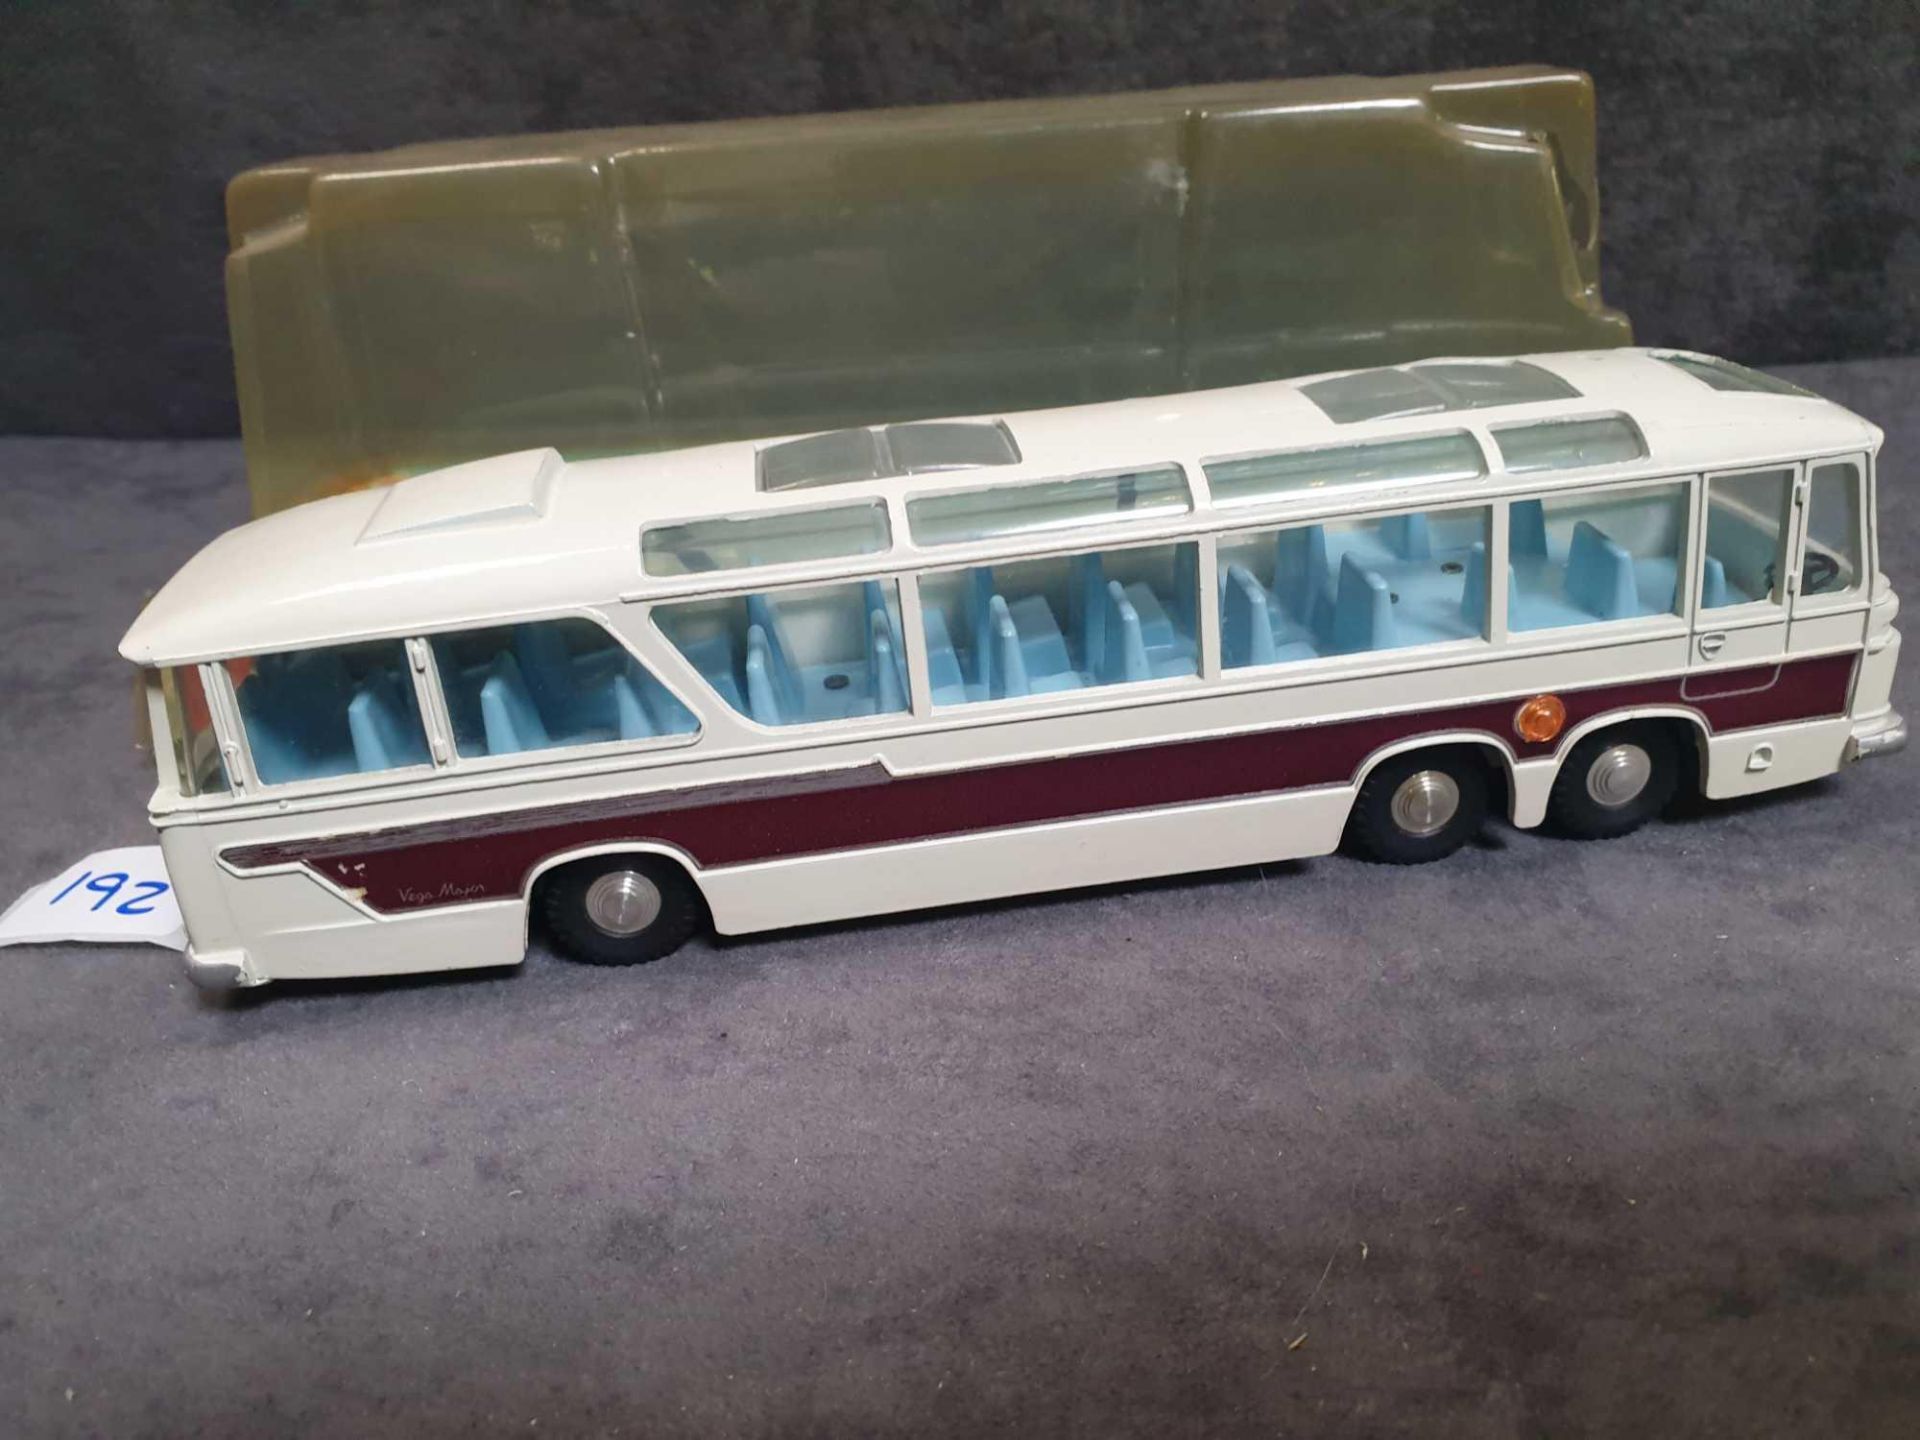 Dinky Diecast #954 Vega Major Luxury Coach Light Blue Interior And Cast Hub In Bubble Packaging - Image 2 of 2